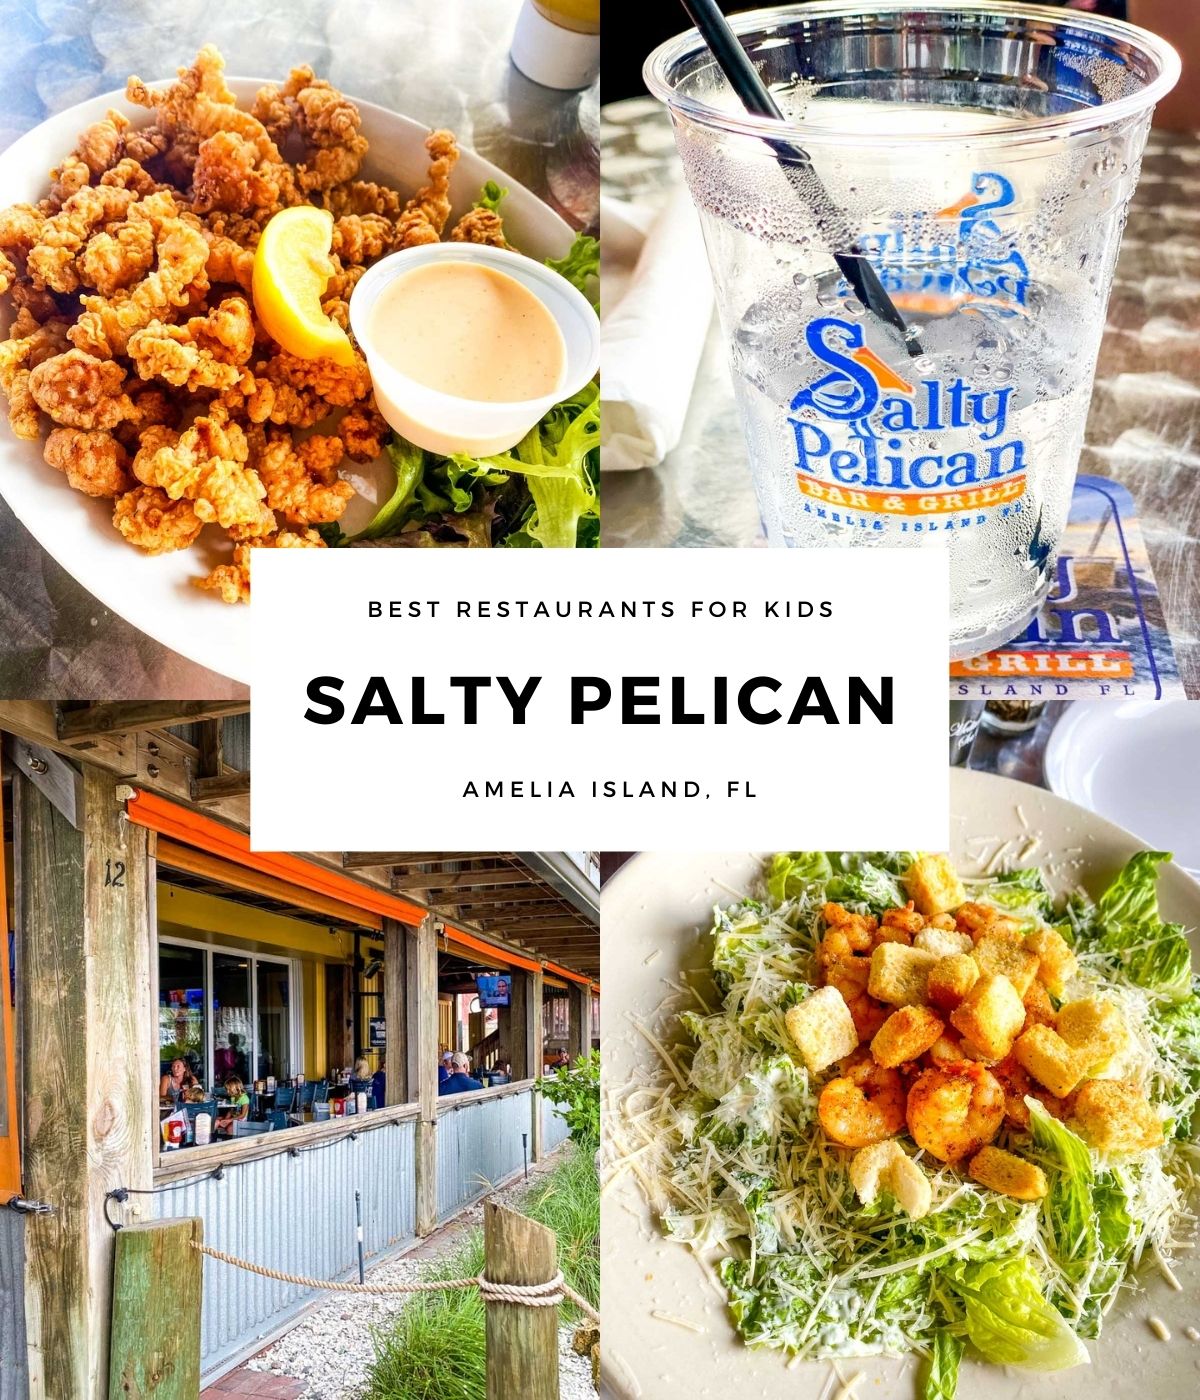 A photo collage shows many of the dishes from The Salty Pelican in Amelia Island.